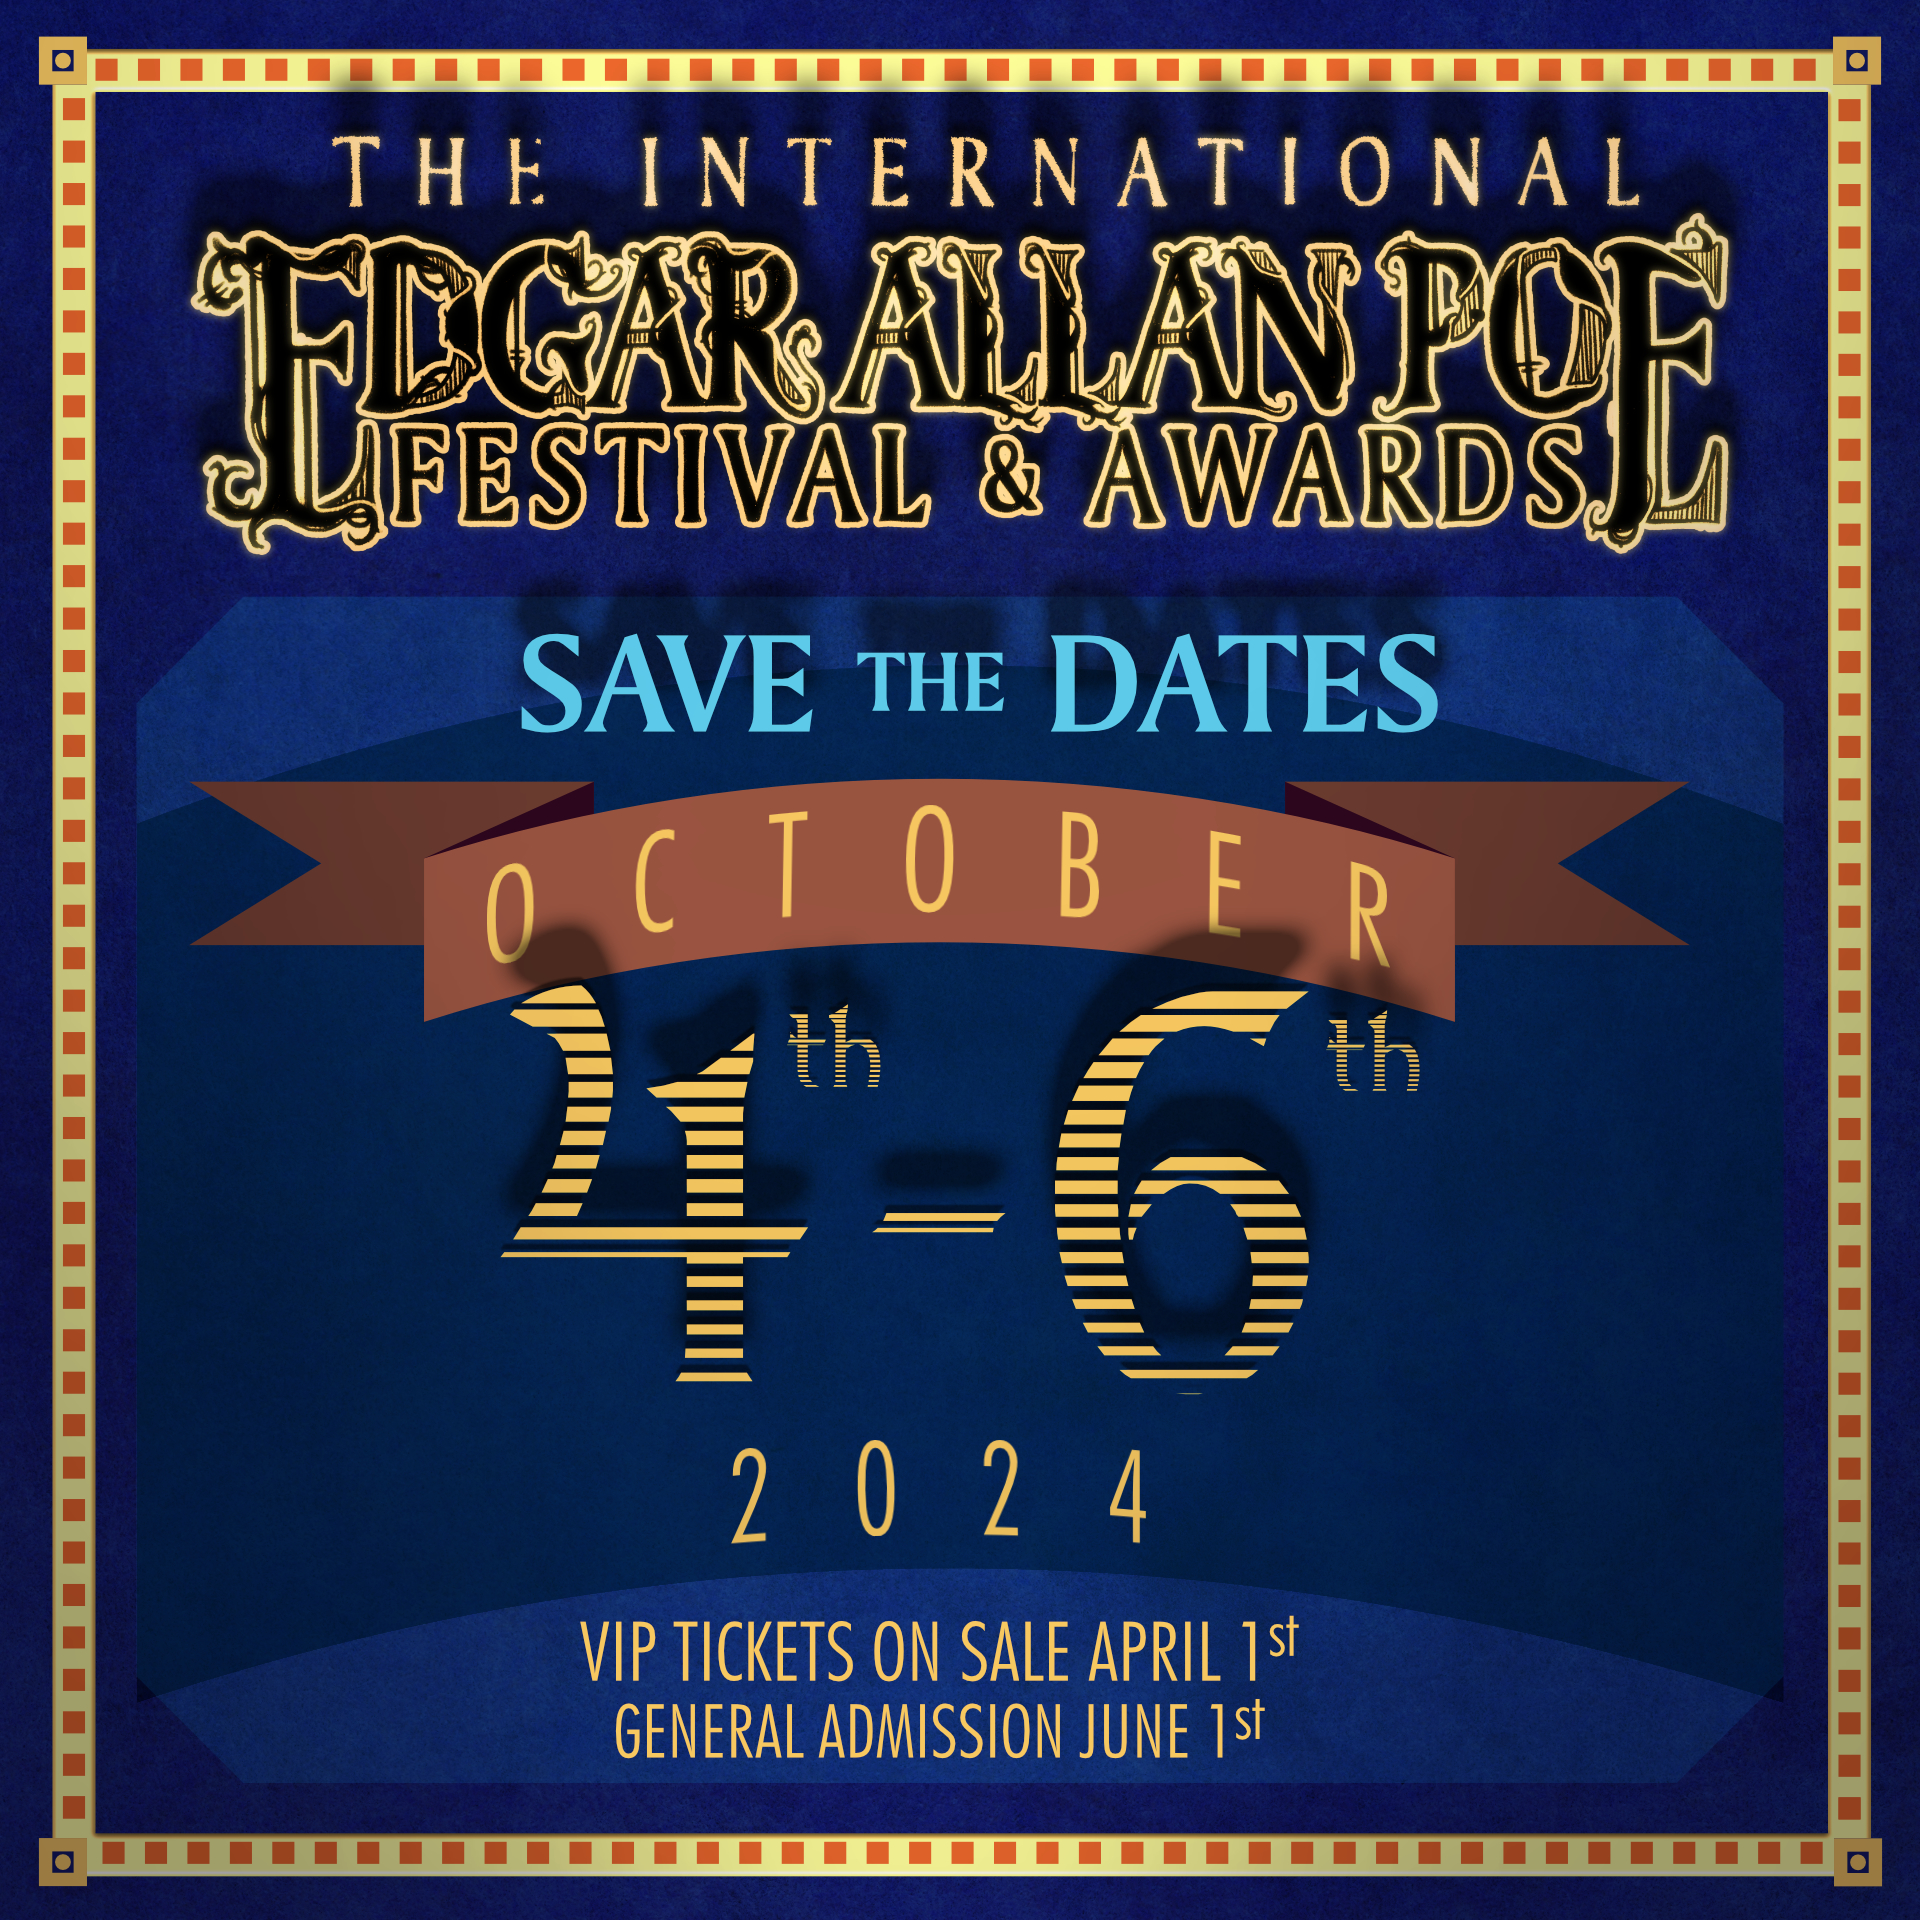 Save the date: Poe Fest International is October 4-6, 2024. Pre-sales open April 1.